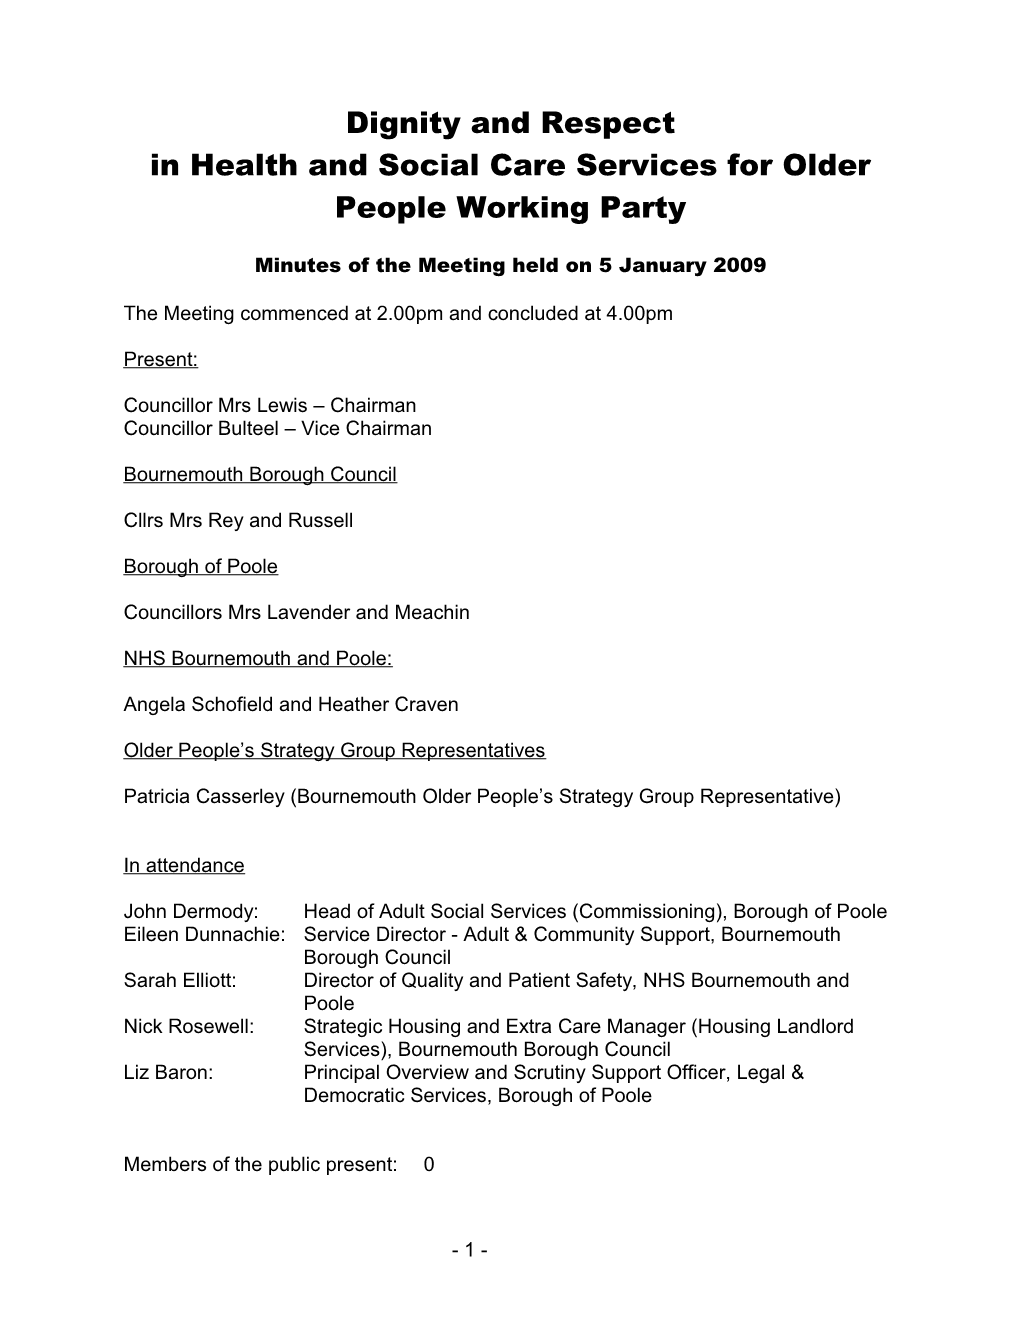 Minutes - Dignity and Respect in Health and Social Care Services for Older People Working